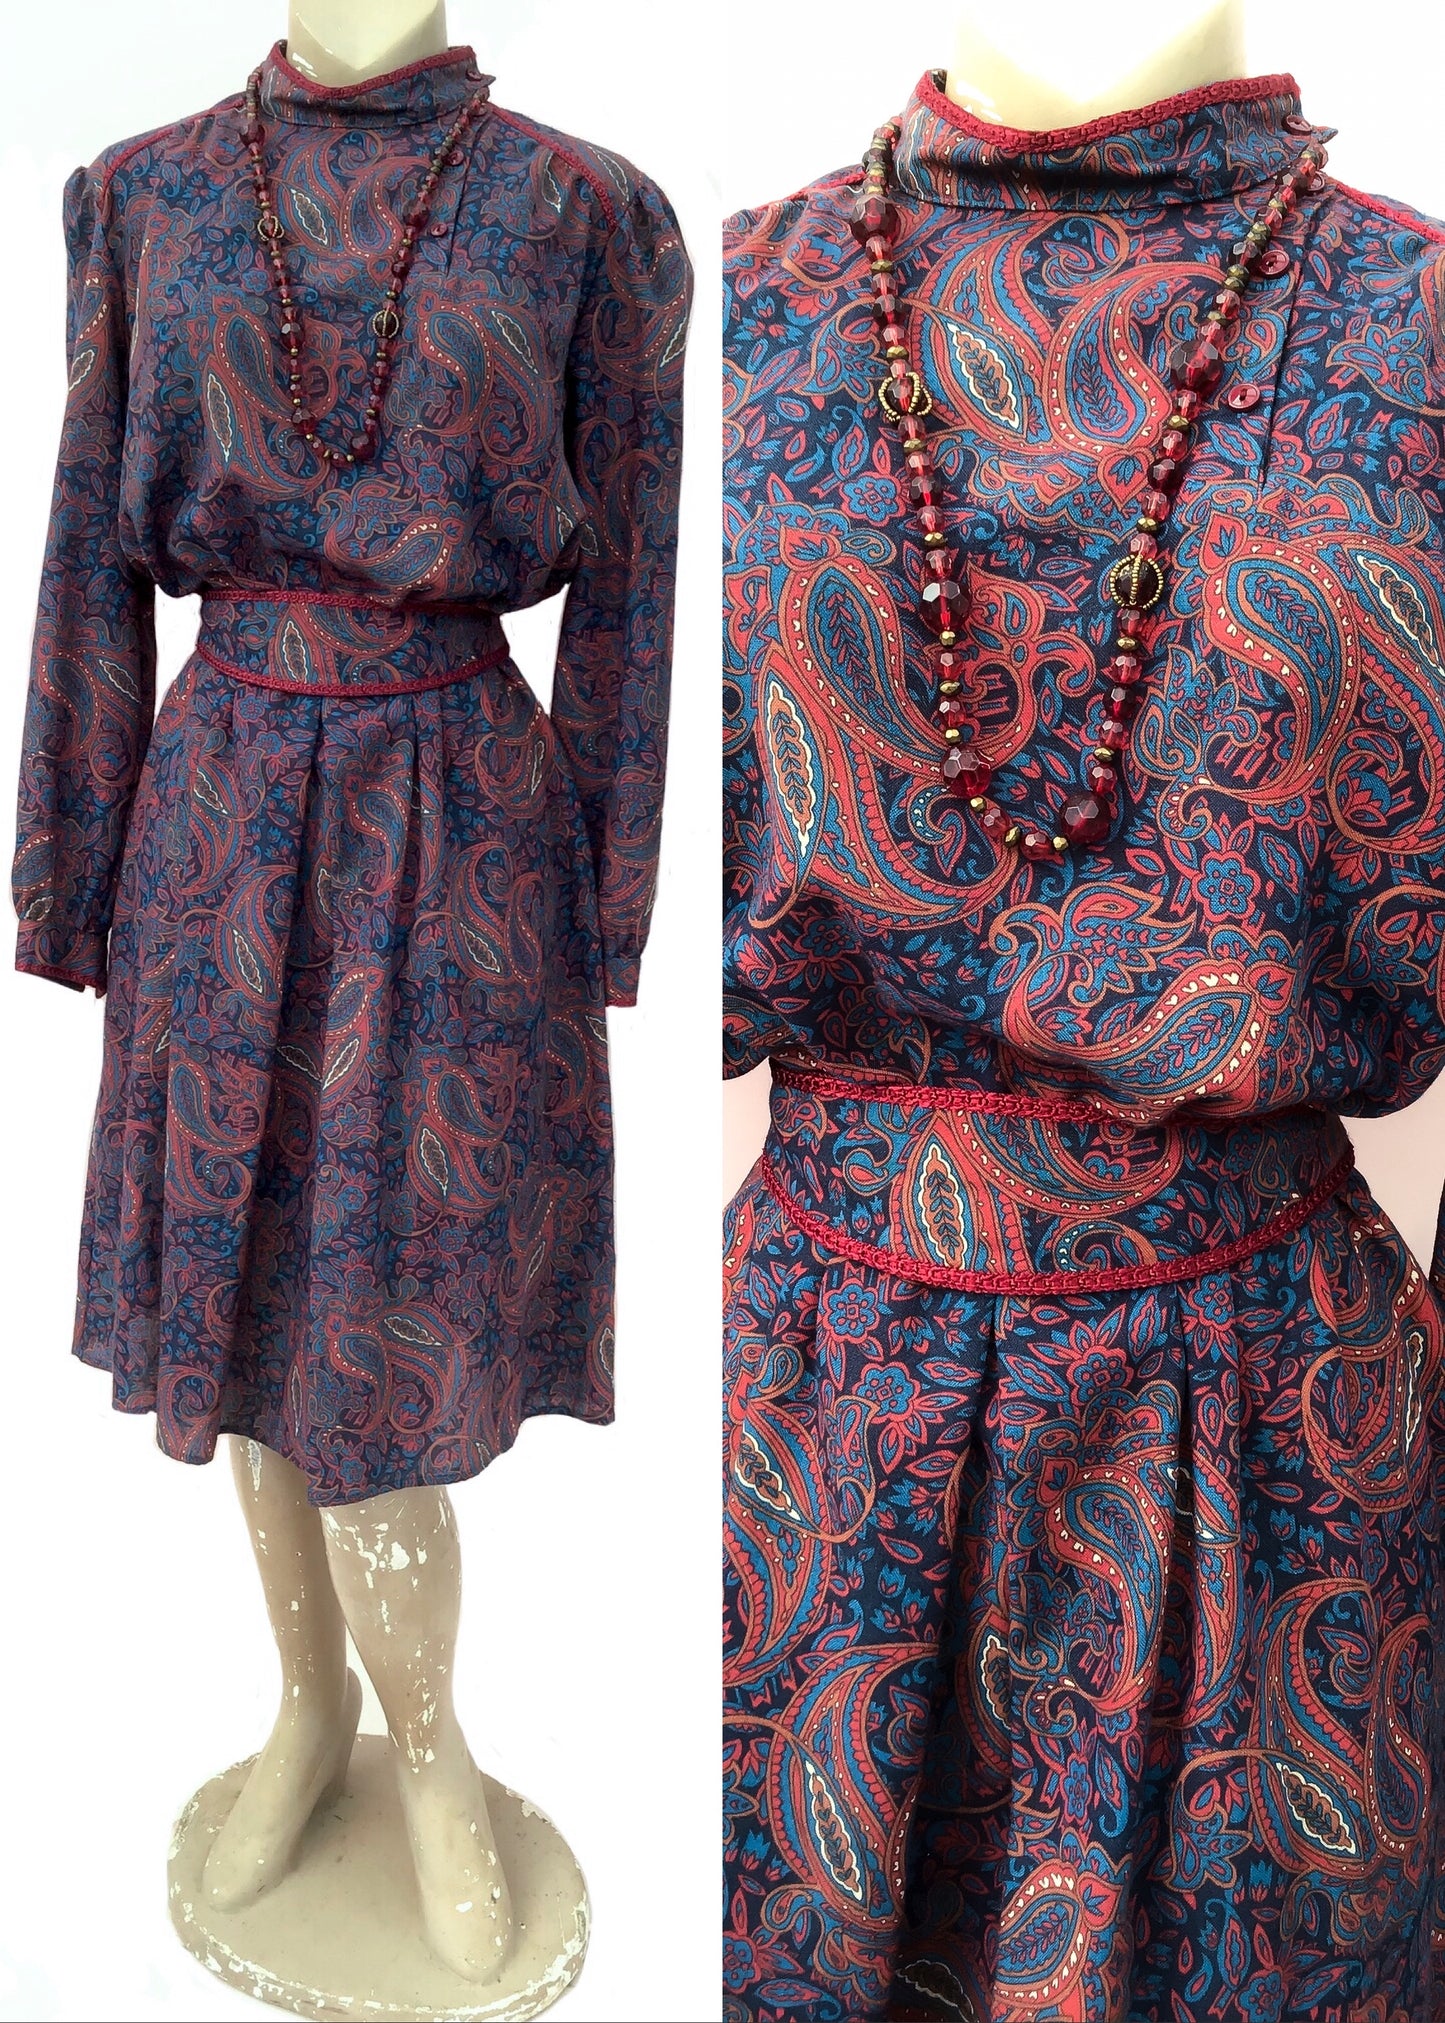 Vintage 70s wool paisley print cossack style dress, perfect for autumn with long sleeves, cummerbund belt and high collar. Made by St Michael.